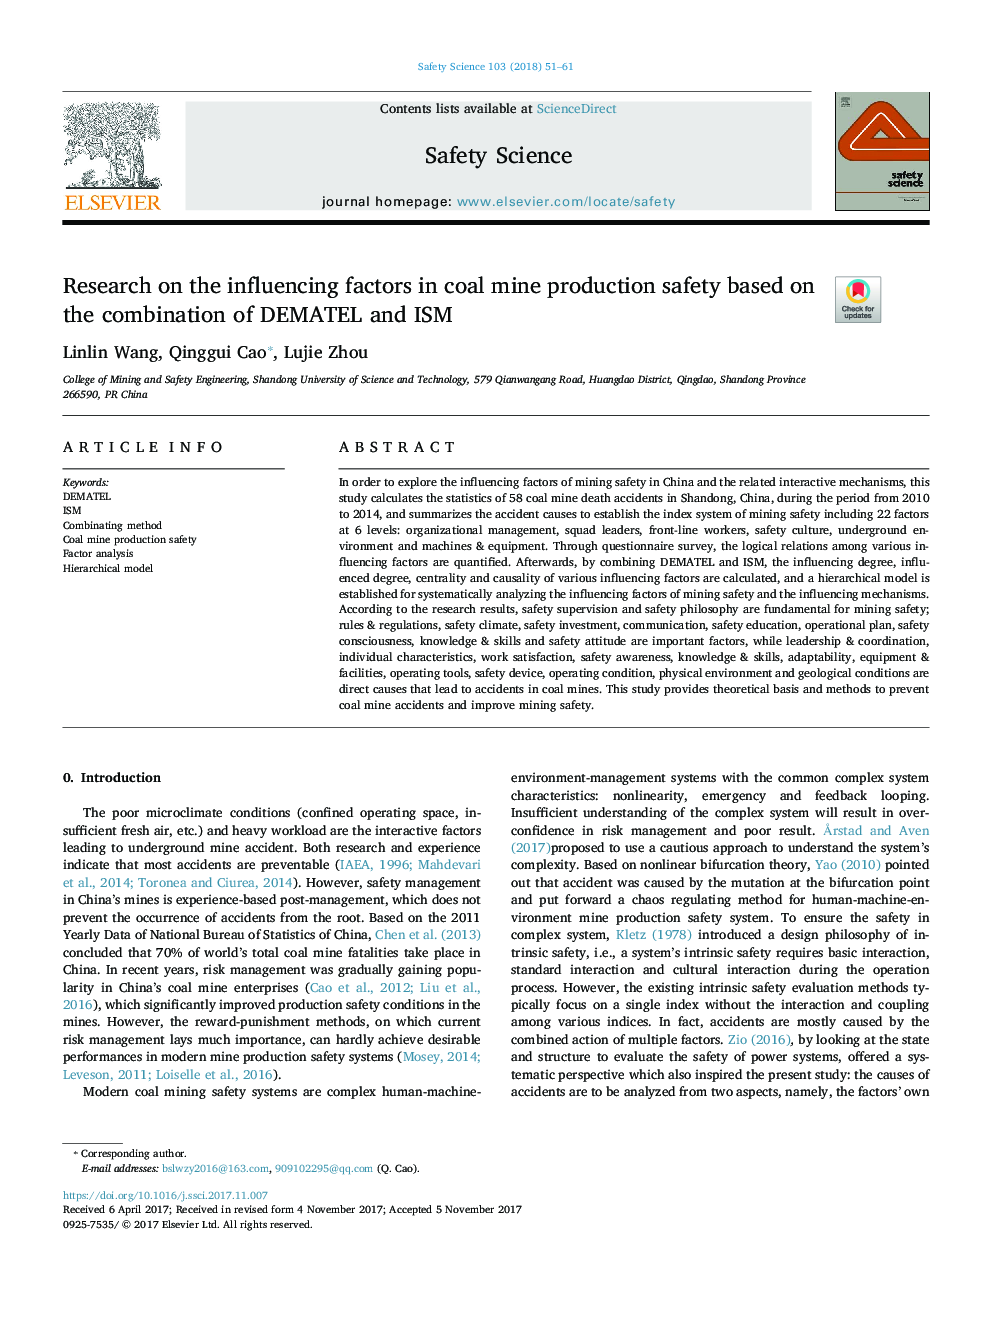 Research on the influencing factors in coal mine production safety based on the combination of DEMATEL and ISM